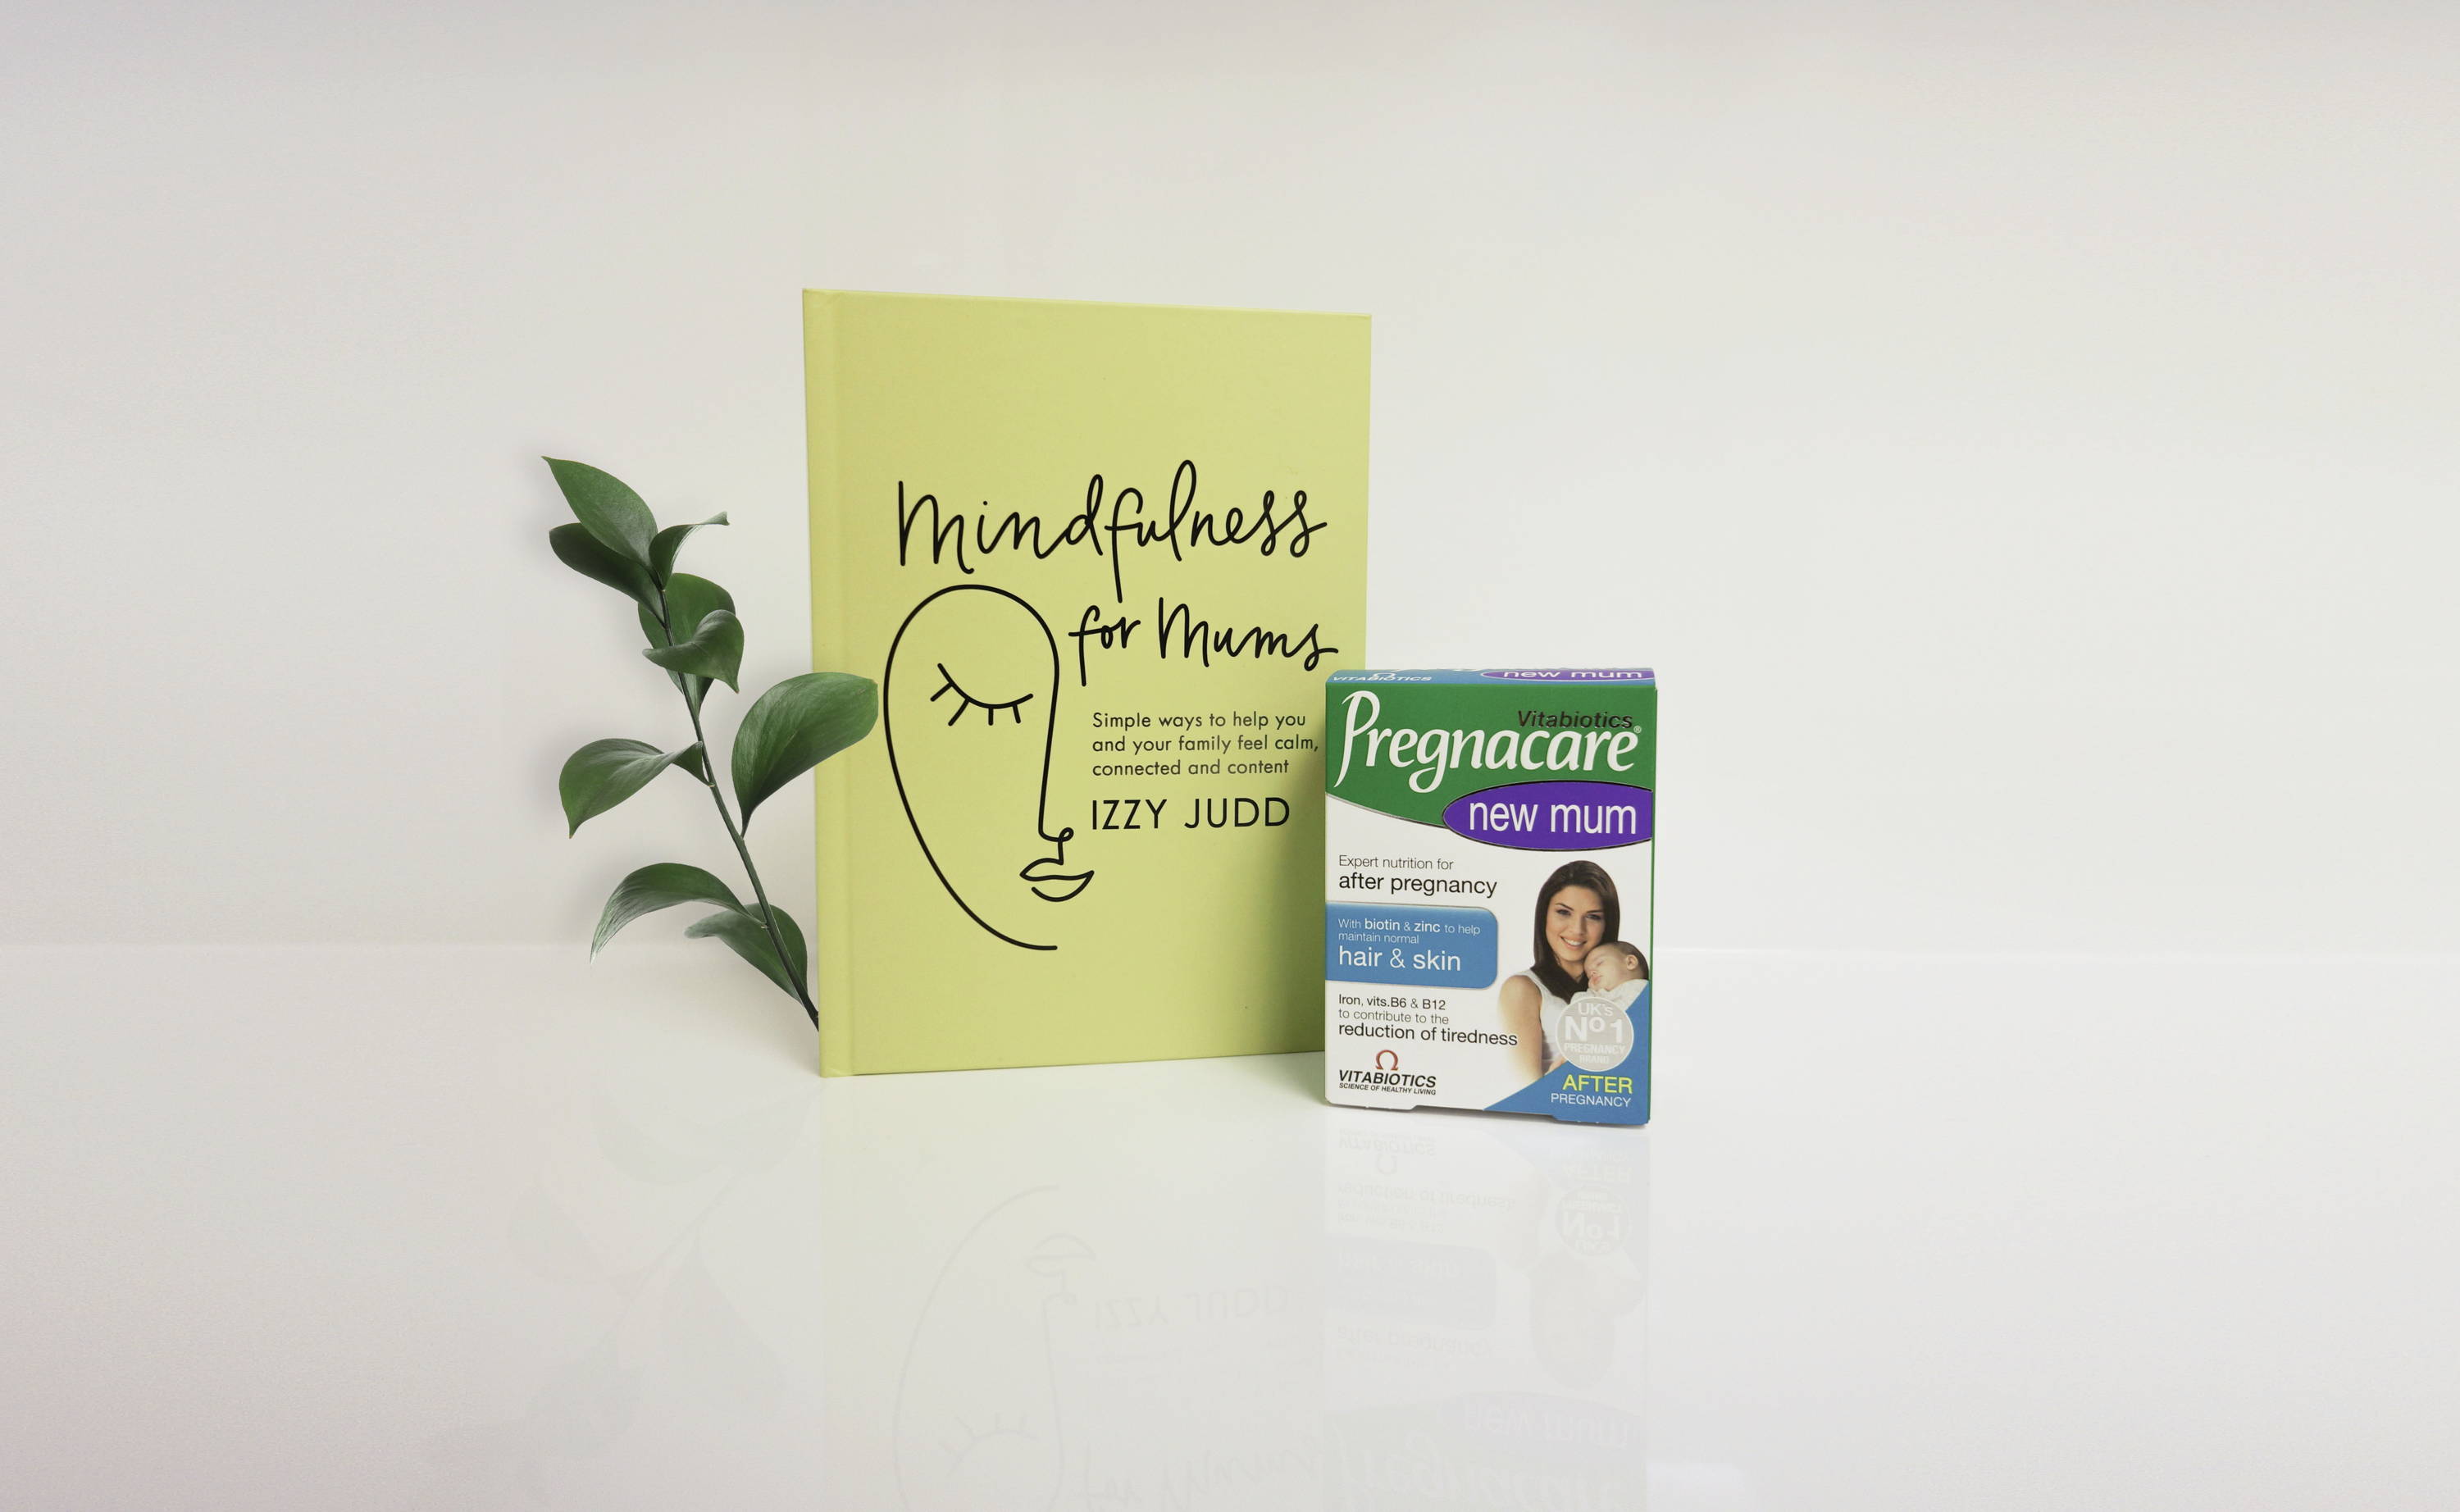 Mindfulness For Mums Book With Pregnacare Product